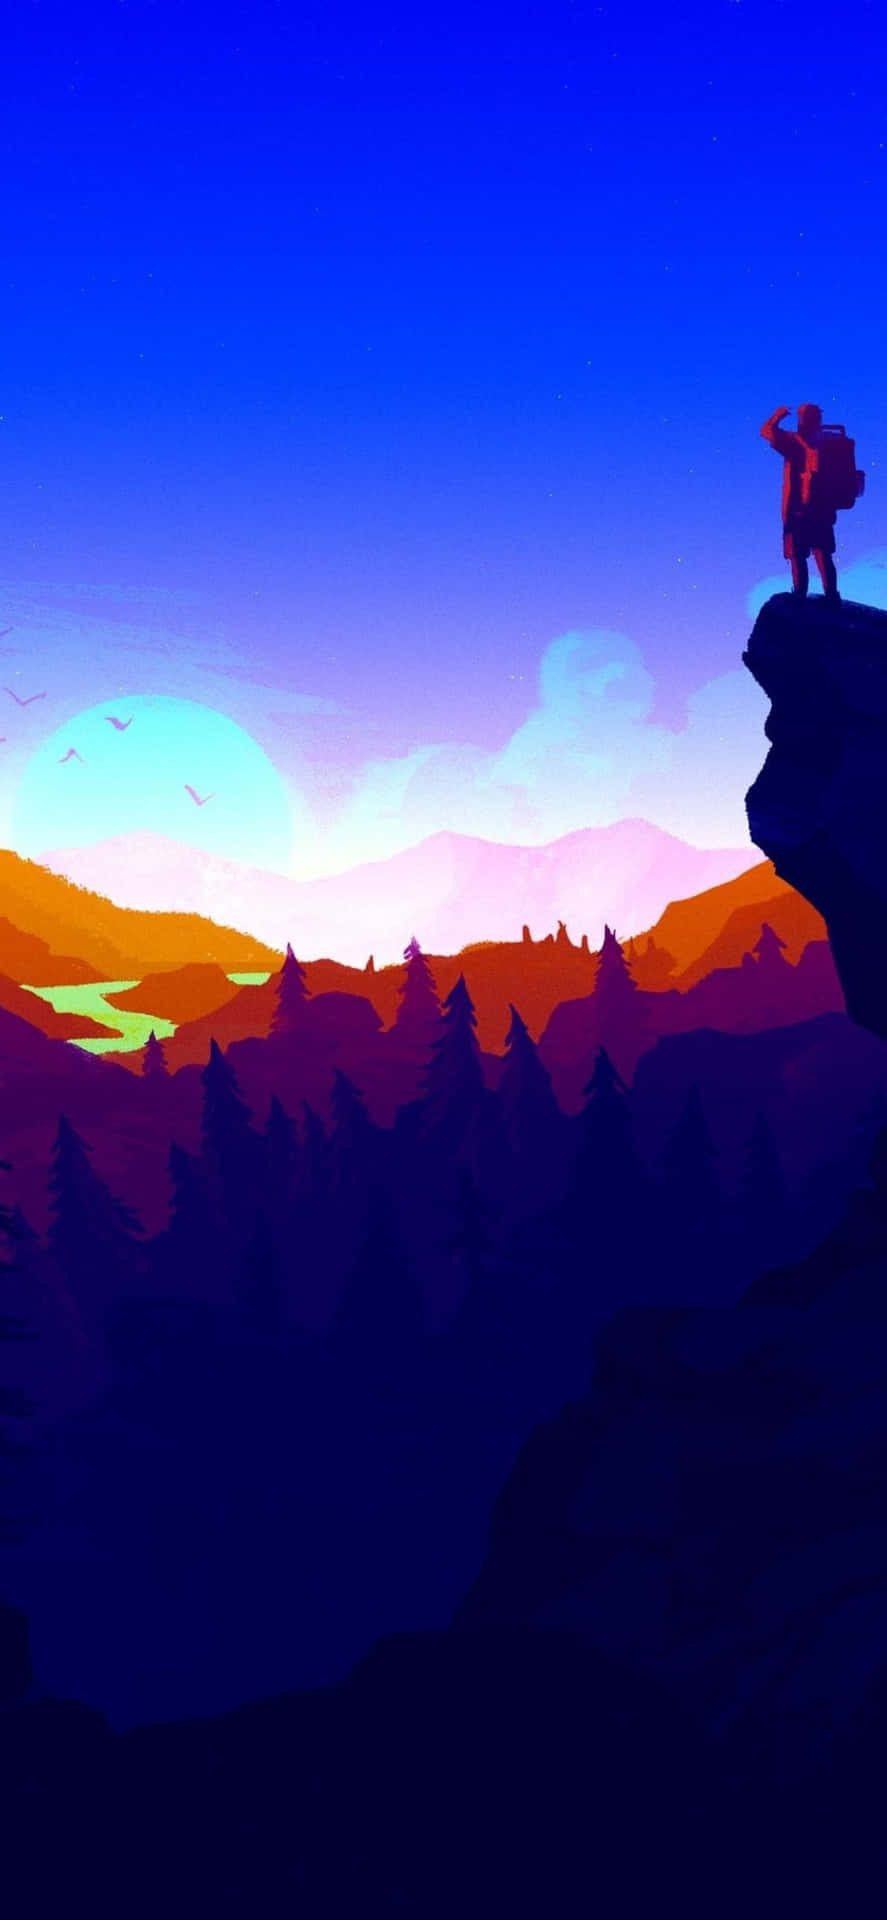 Get Epic with the New iPhone Wallpaper